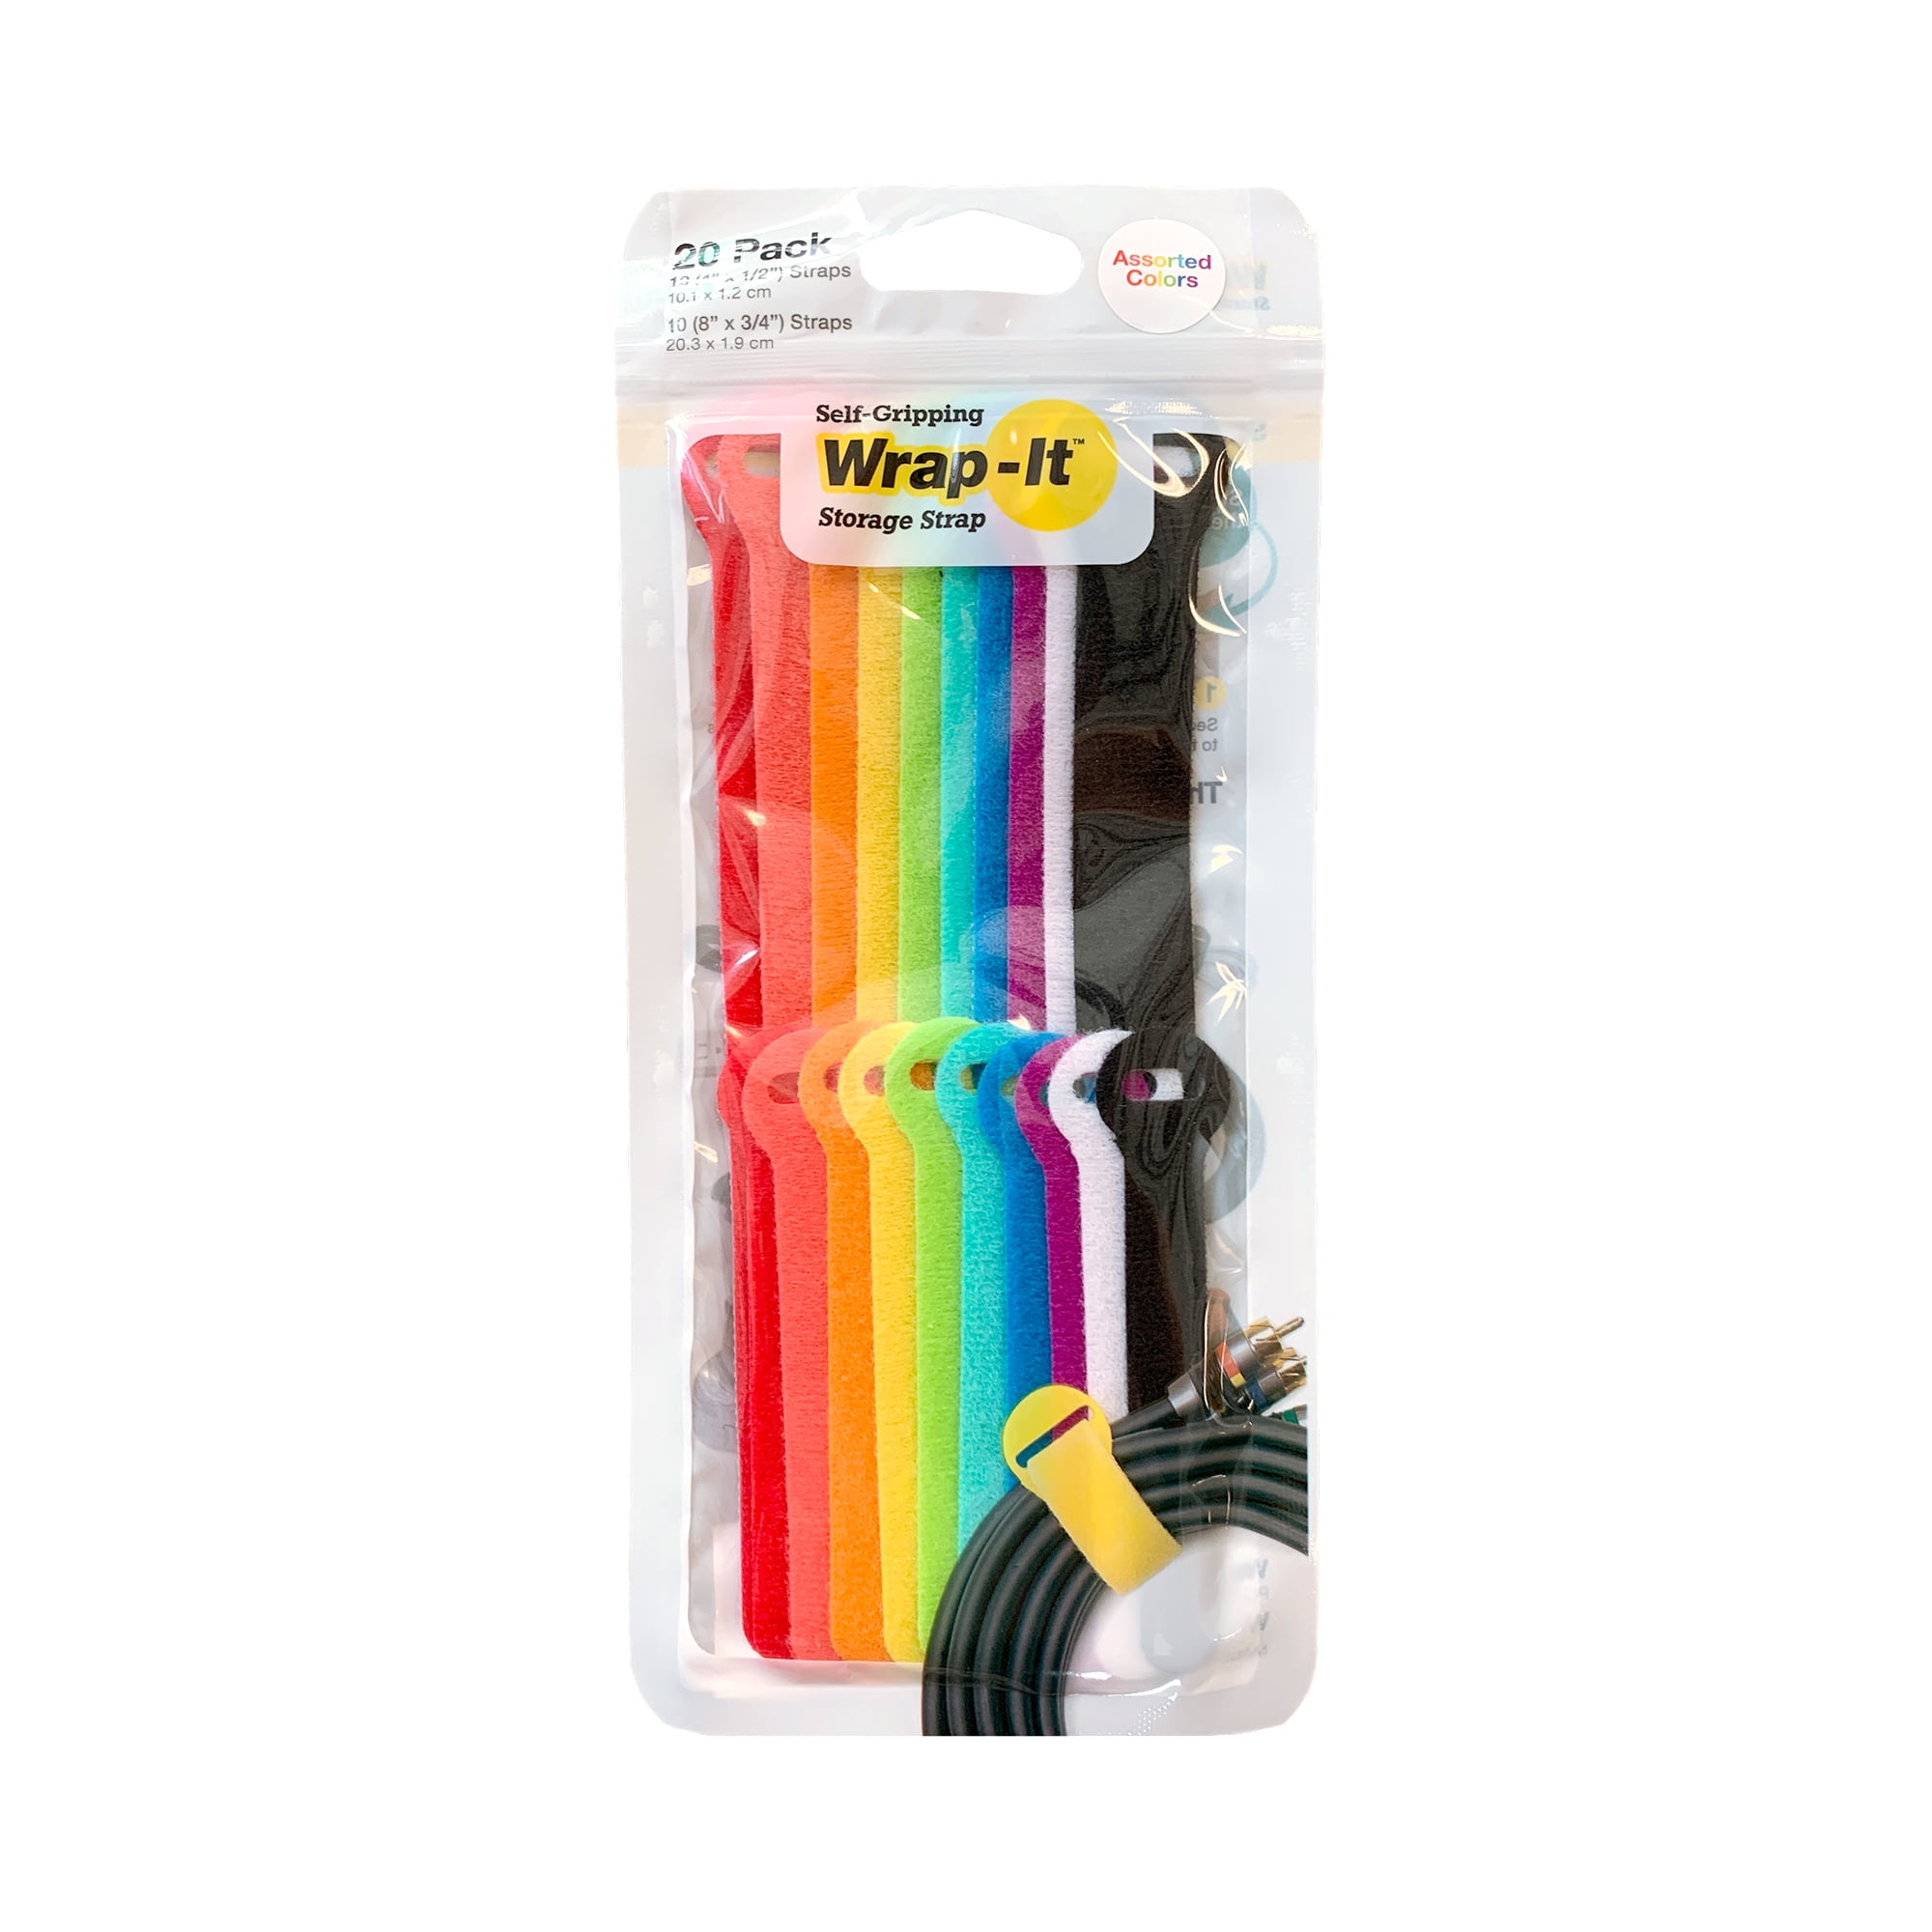 5 Inch Straps – Reusable Hook and Loop Cord Organizer Cable Ties for Cord Management and Desk or Office Organization Self-Gripping Cable Ties by Wrap-It Storage Multi-Color 50-pack